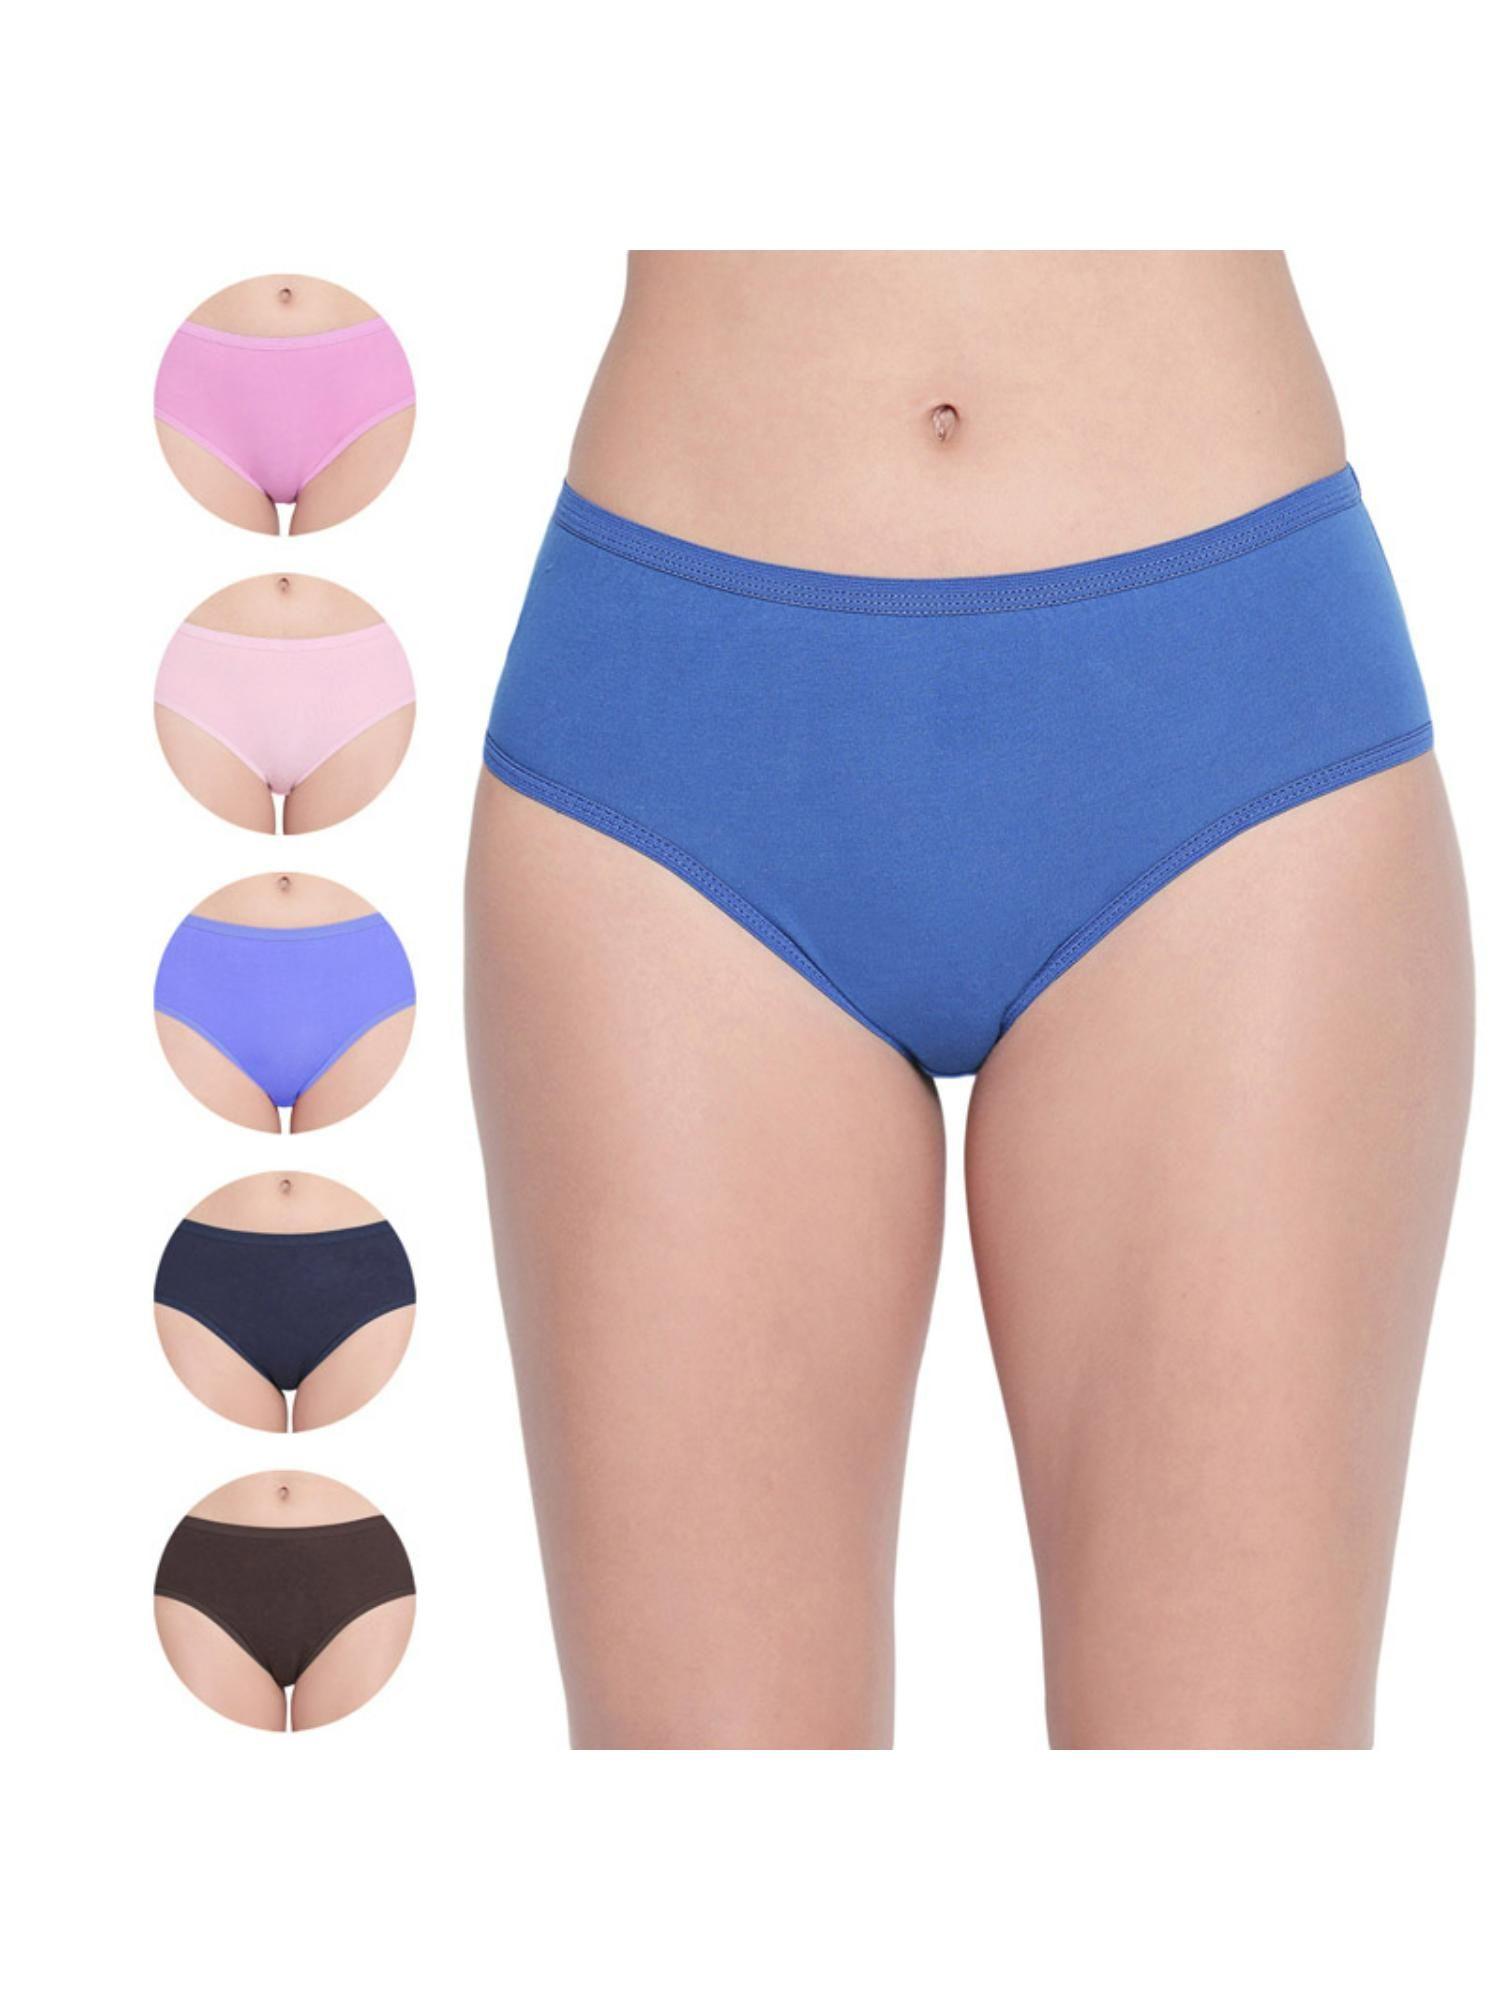 pack of 6 100% cotton classic panties in e26cd - multi-color